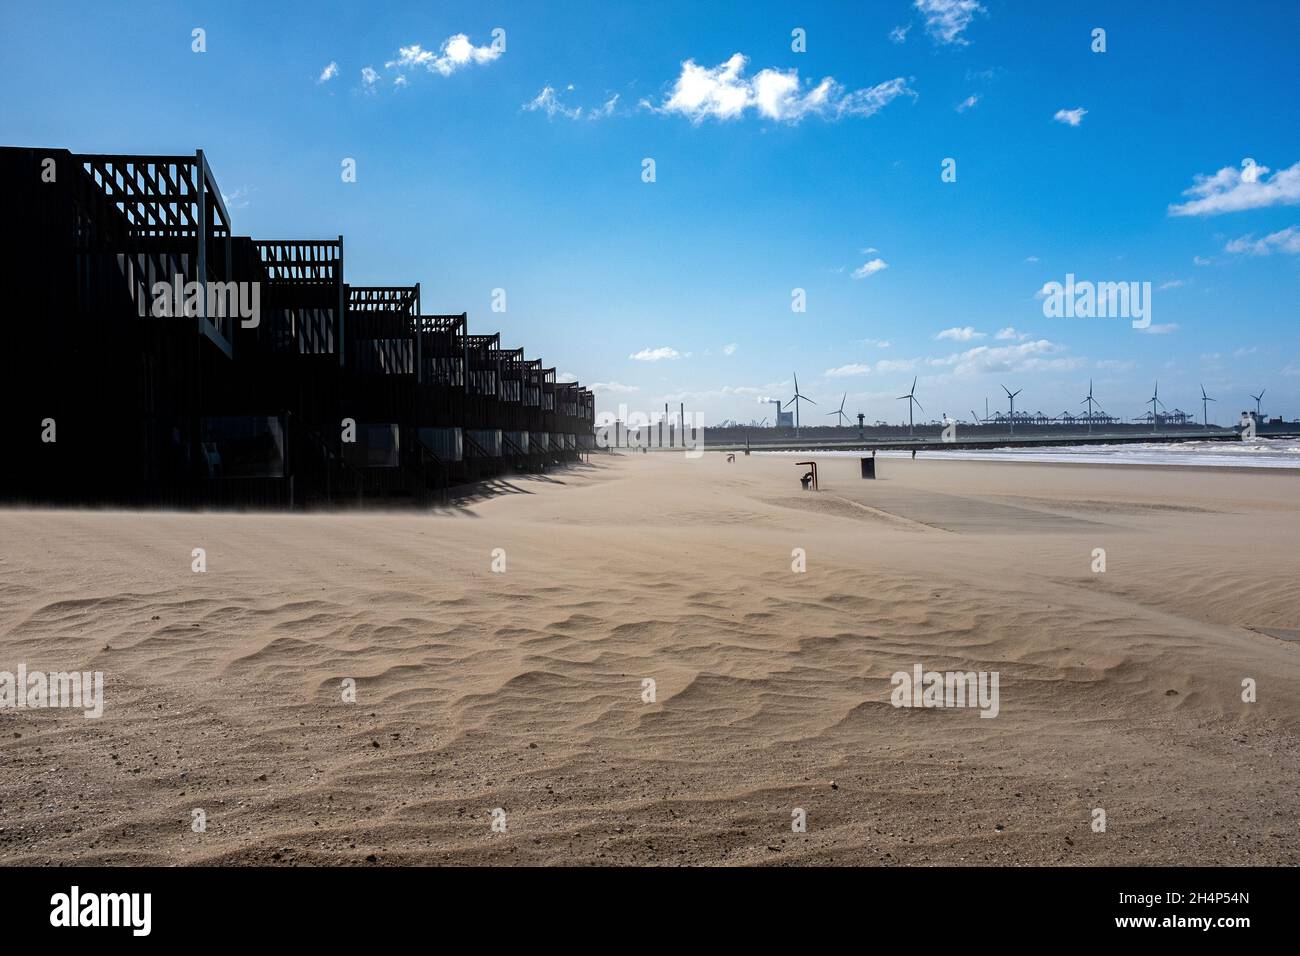 Hoek van Holland, Netherlands. The previously very buzy and crowded beach, were people came to relax and steroll, is now totally deserted on advise of Govenment Authorities in response of Corona Crisis. Stock Photo